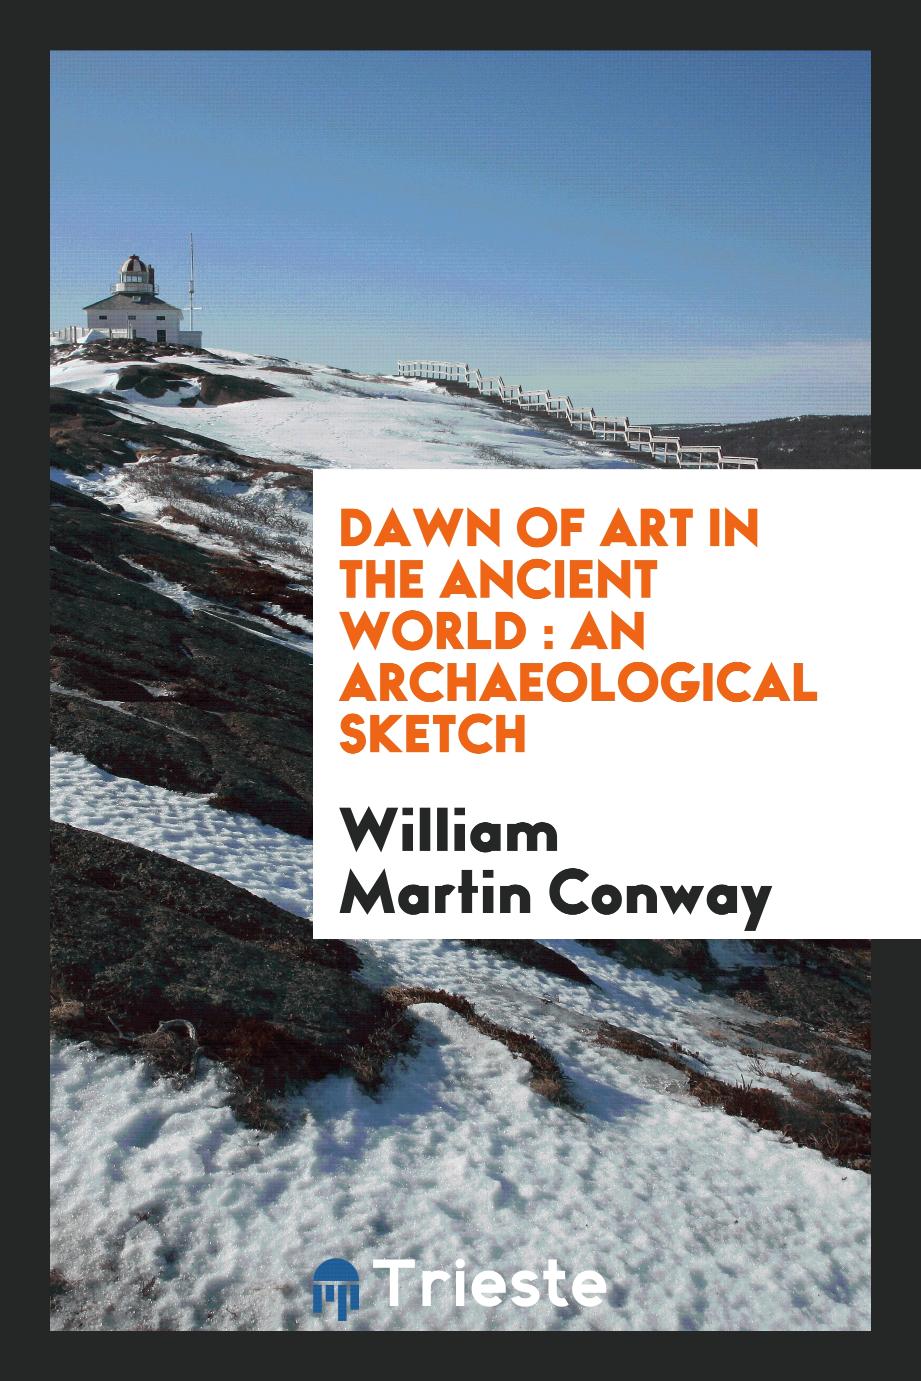 Dawn of art in the ancient world : an archaeological sketch